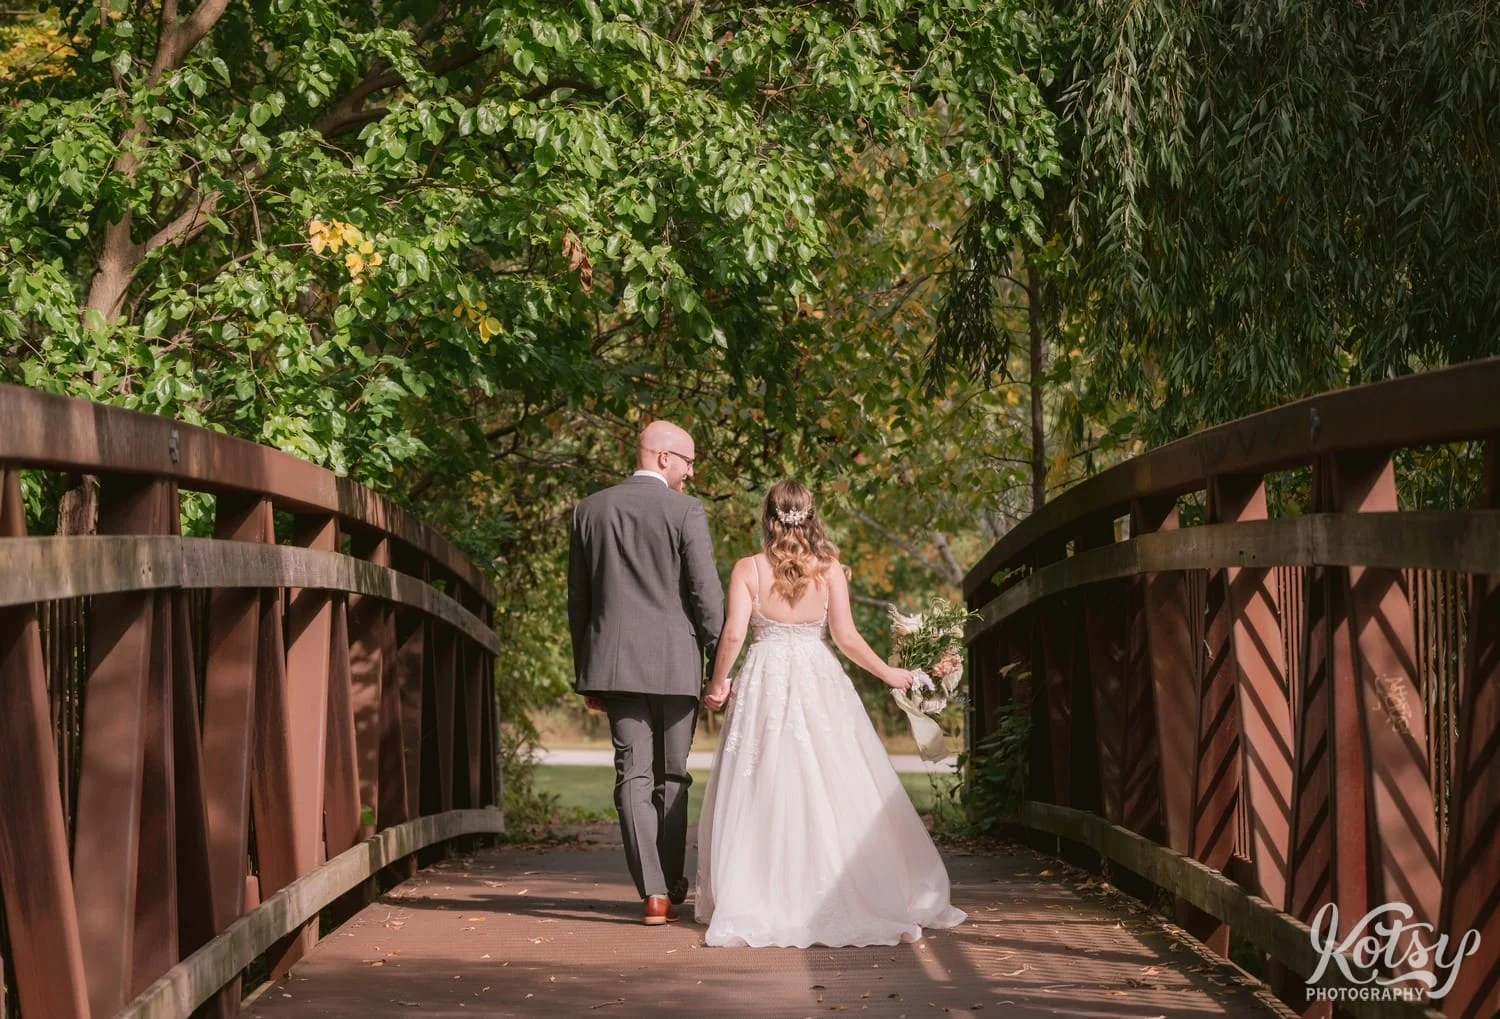 A real shot of a groom wearing a gray suit and a bright wearing a white vital gown holding a flower bouquet walking away from the camera on a steel bridge at West Deane Park in Toronto, Canada